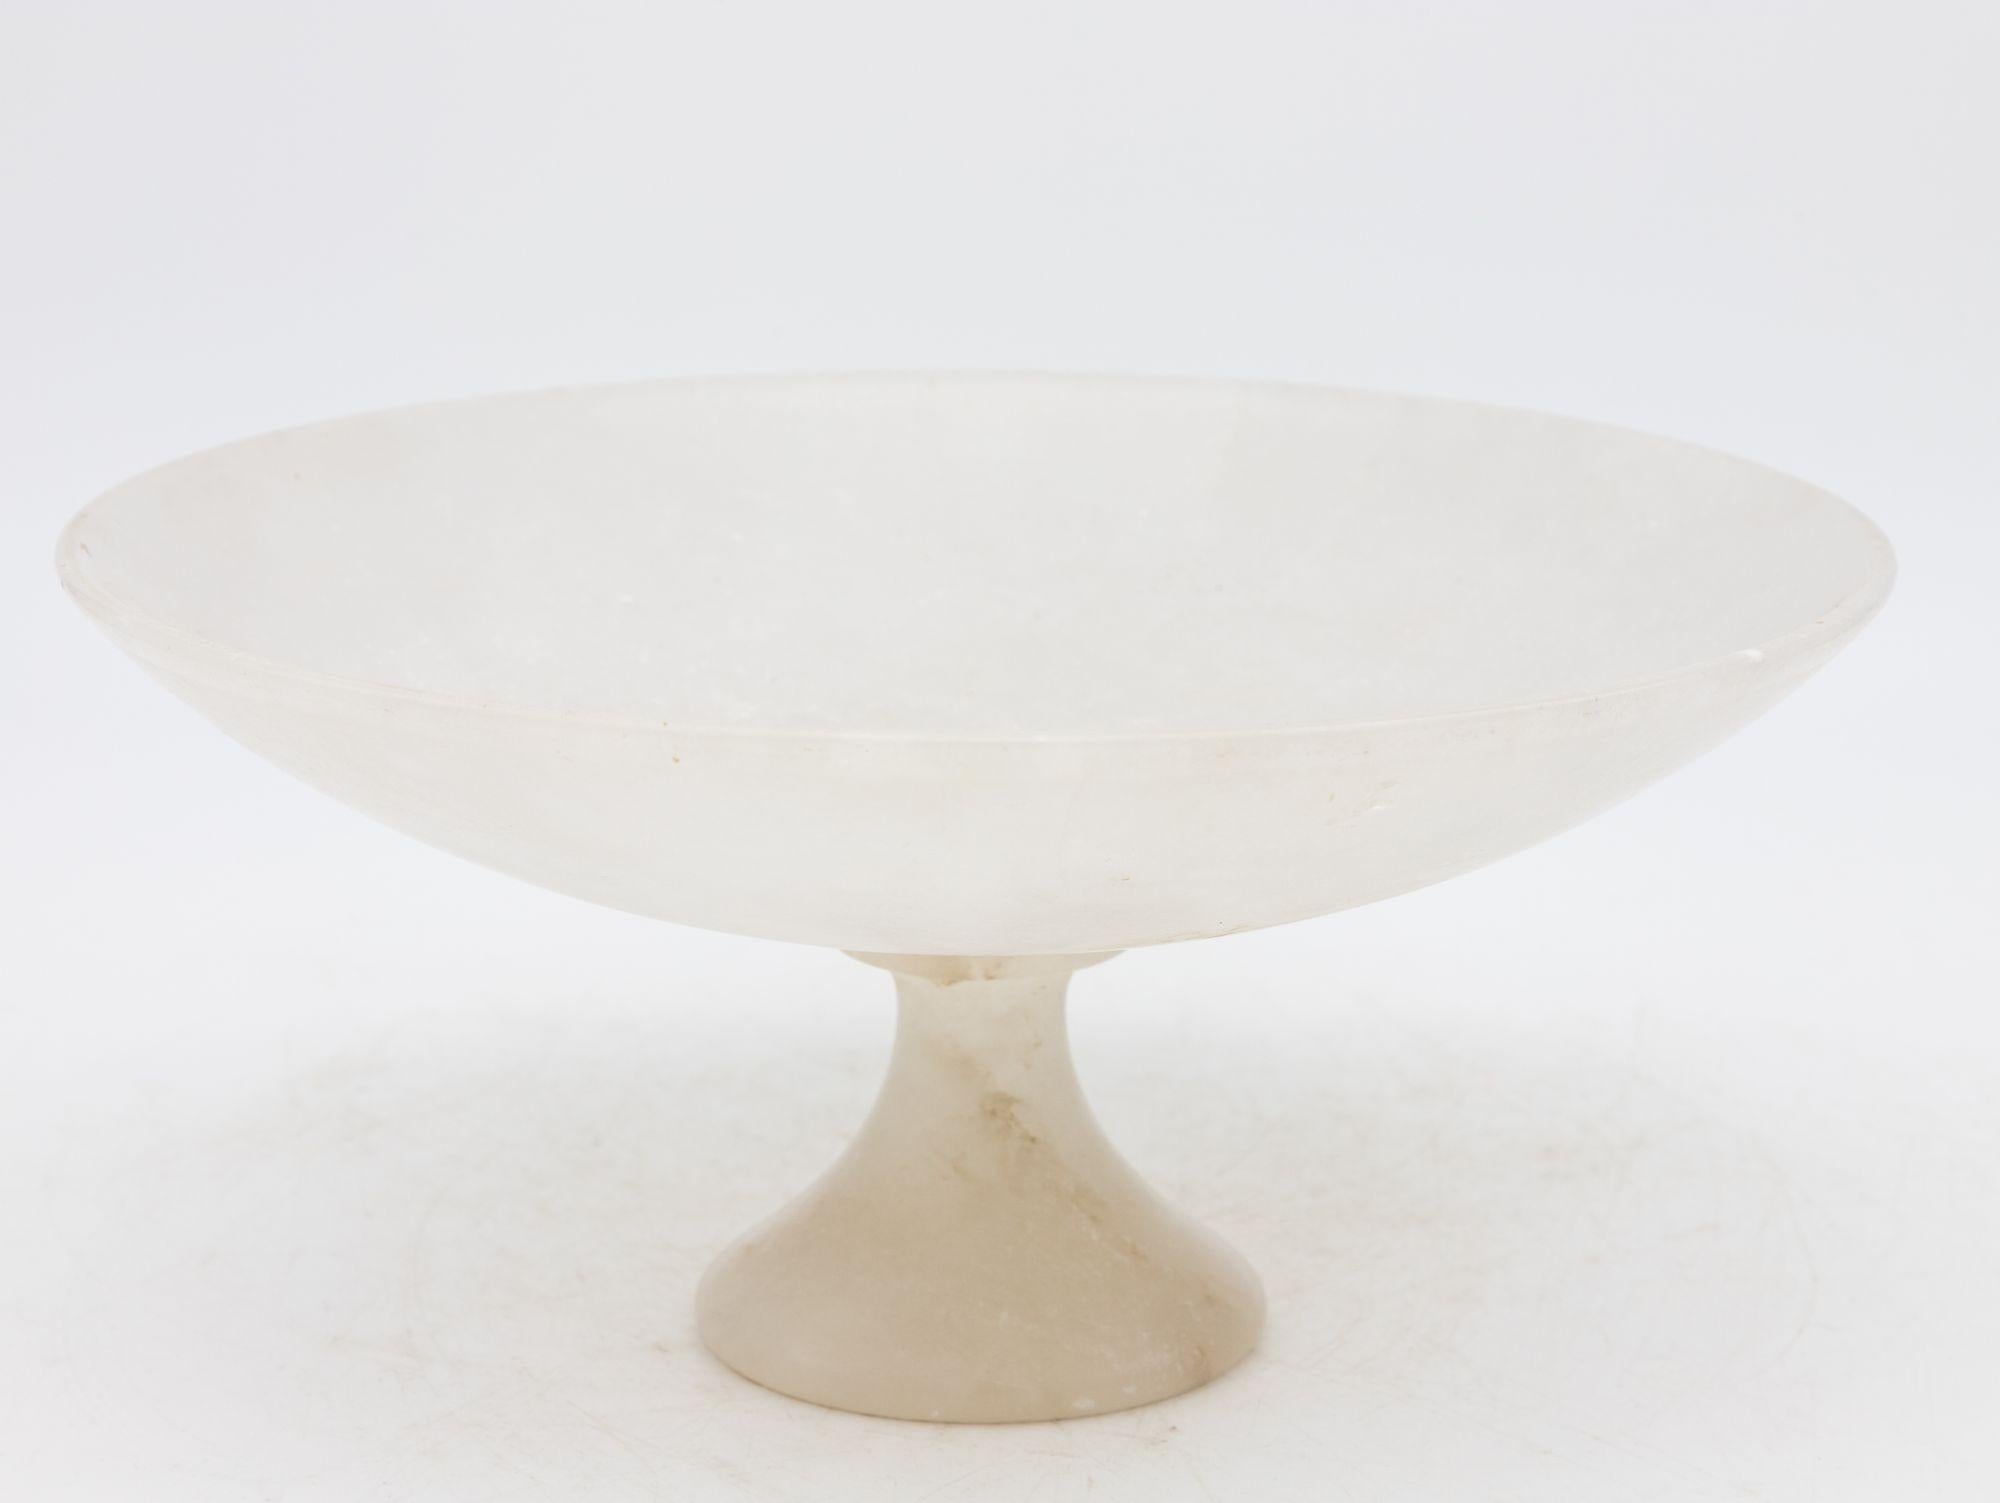 Translucent Neoclassical Alabaster Compote, Italian Early 20th Century In Good Condition For Sale In South Salem, NY